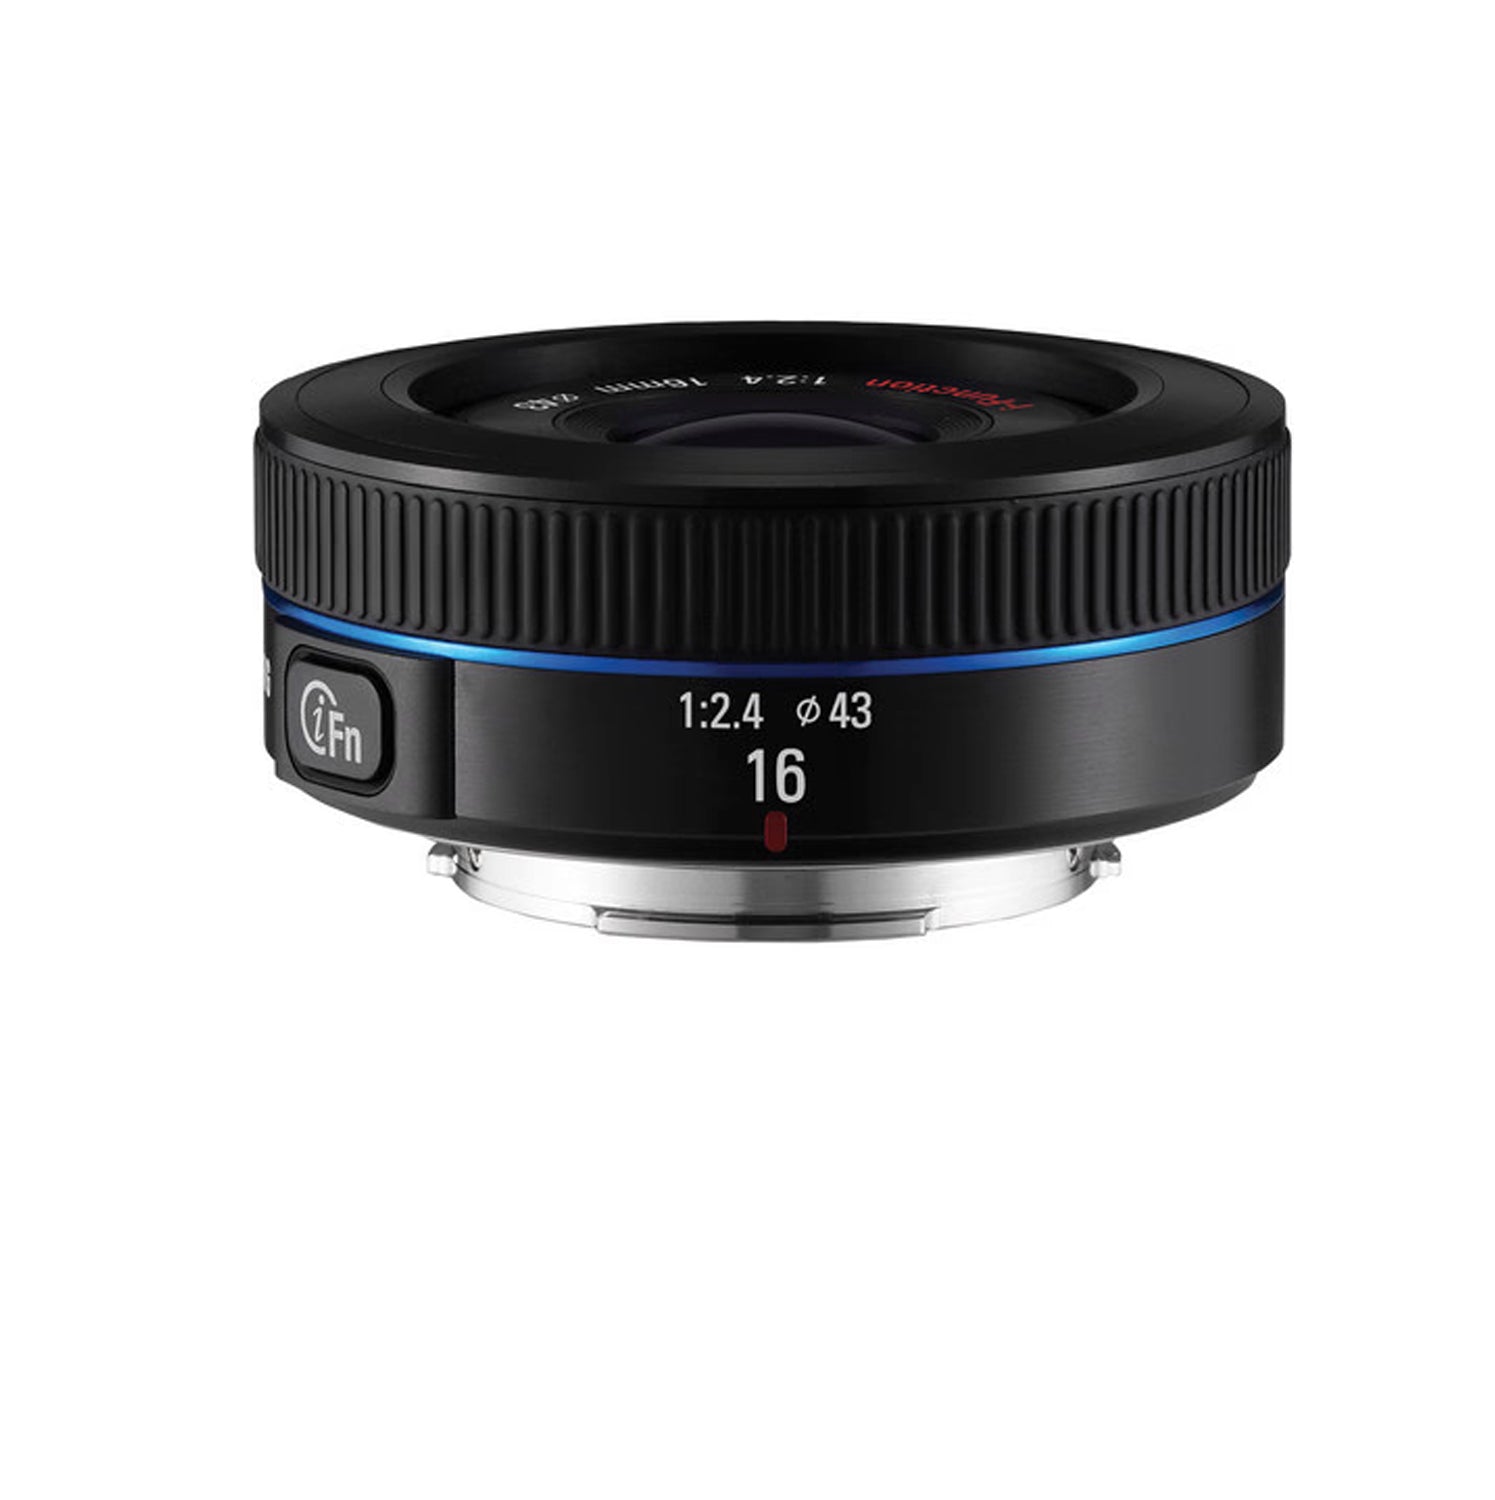 Samsung 16mm F/2.4 Wide Lens for Samsung NX Camera - Kit with 128GB Memory Card